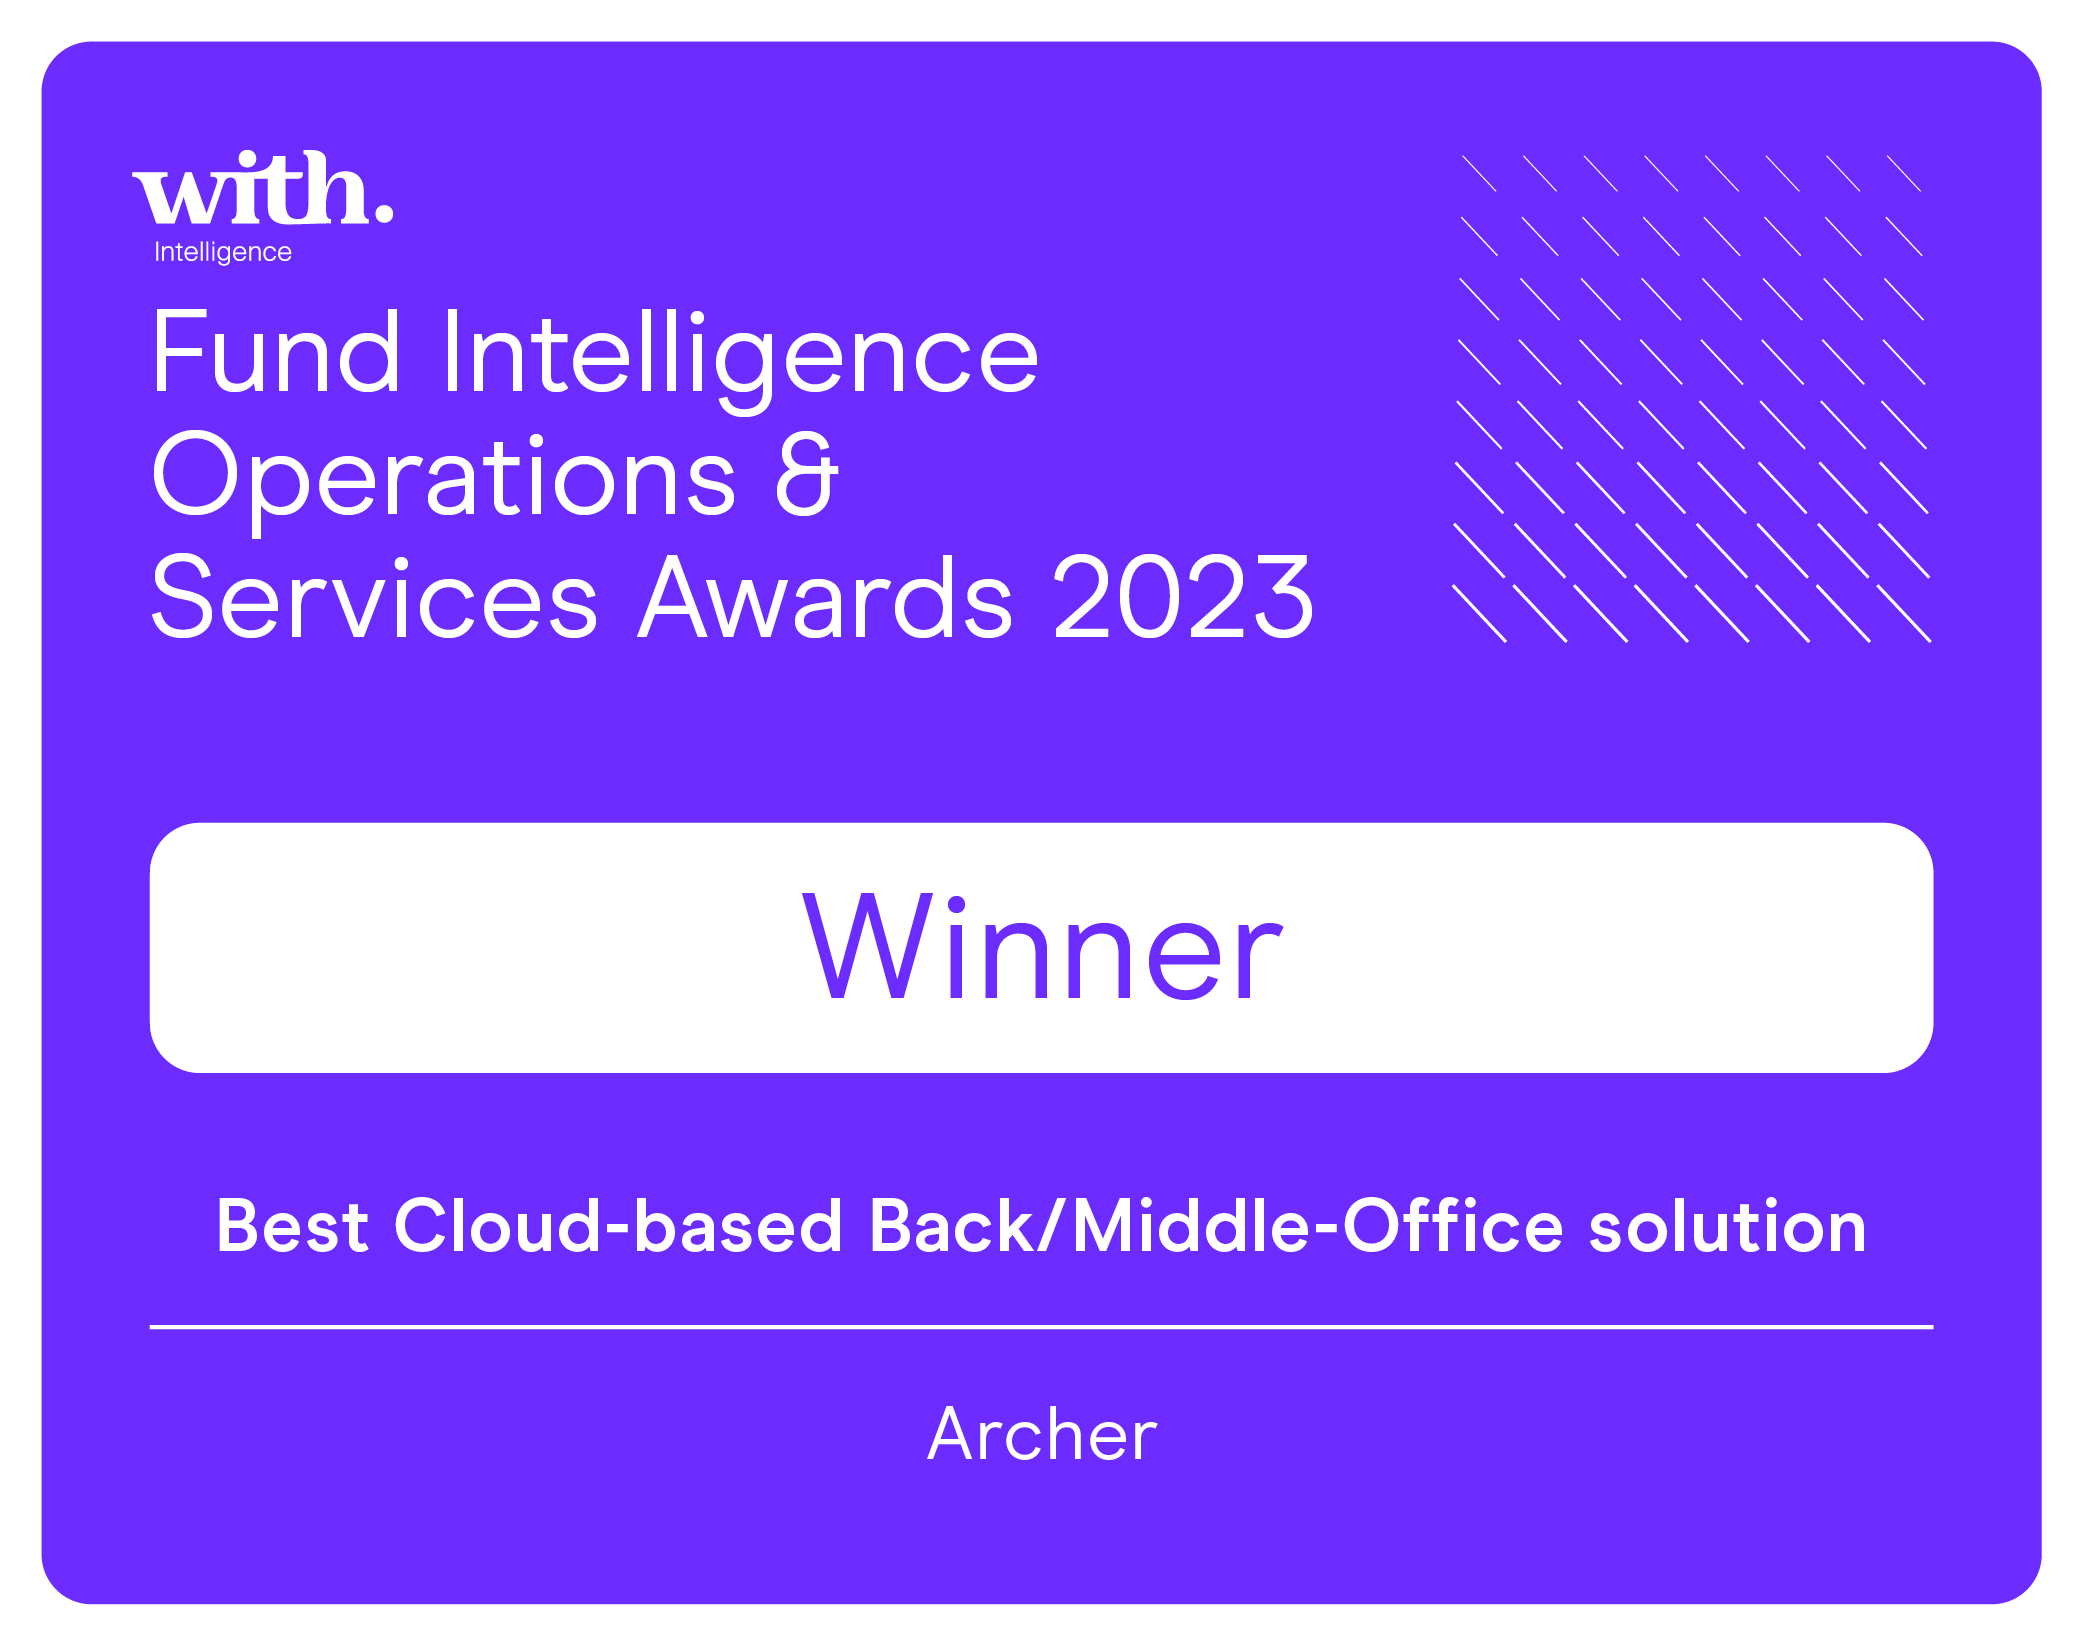 with. Intelligence Fund Intelligence Operations & Services Awards 2023 Winner Best Cloud-based Back/Middle-Office solution